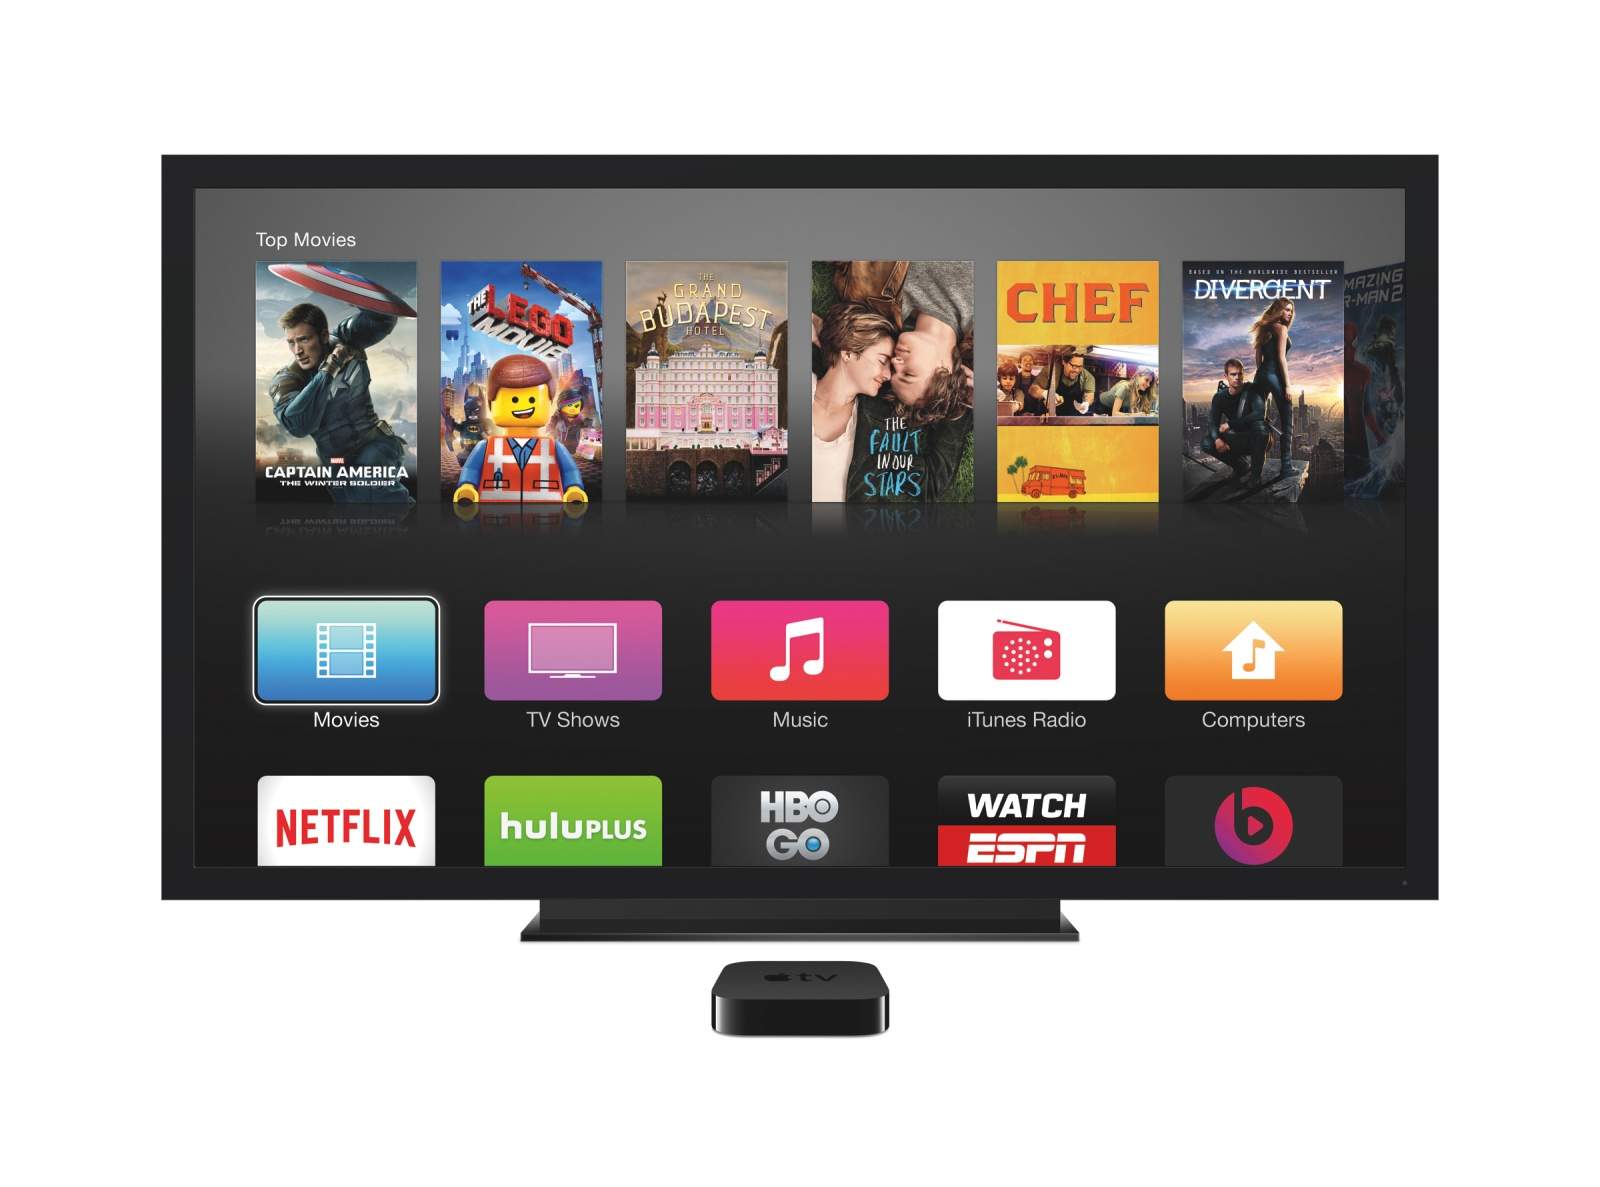 klip pust Kritisk Your old Apple TV is ready for its update